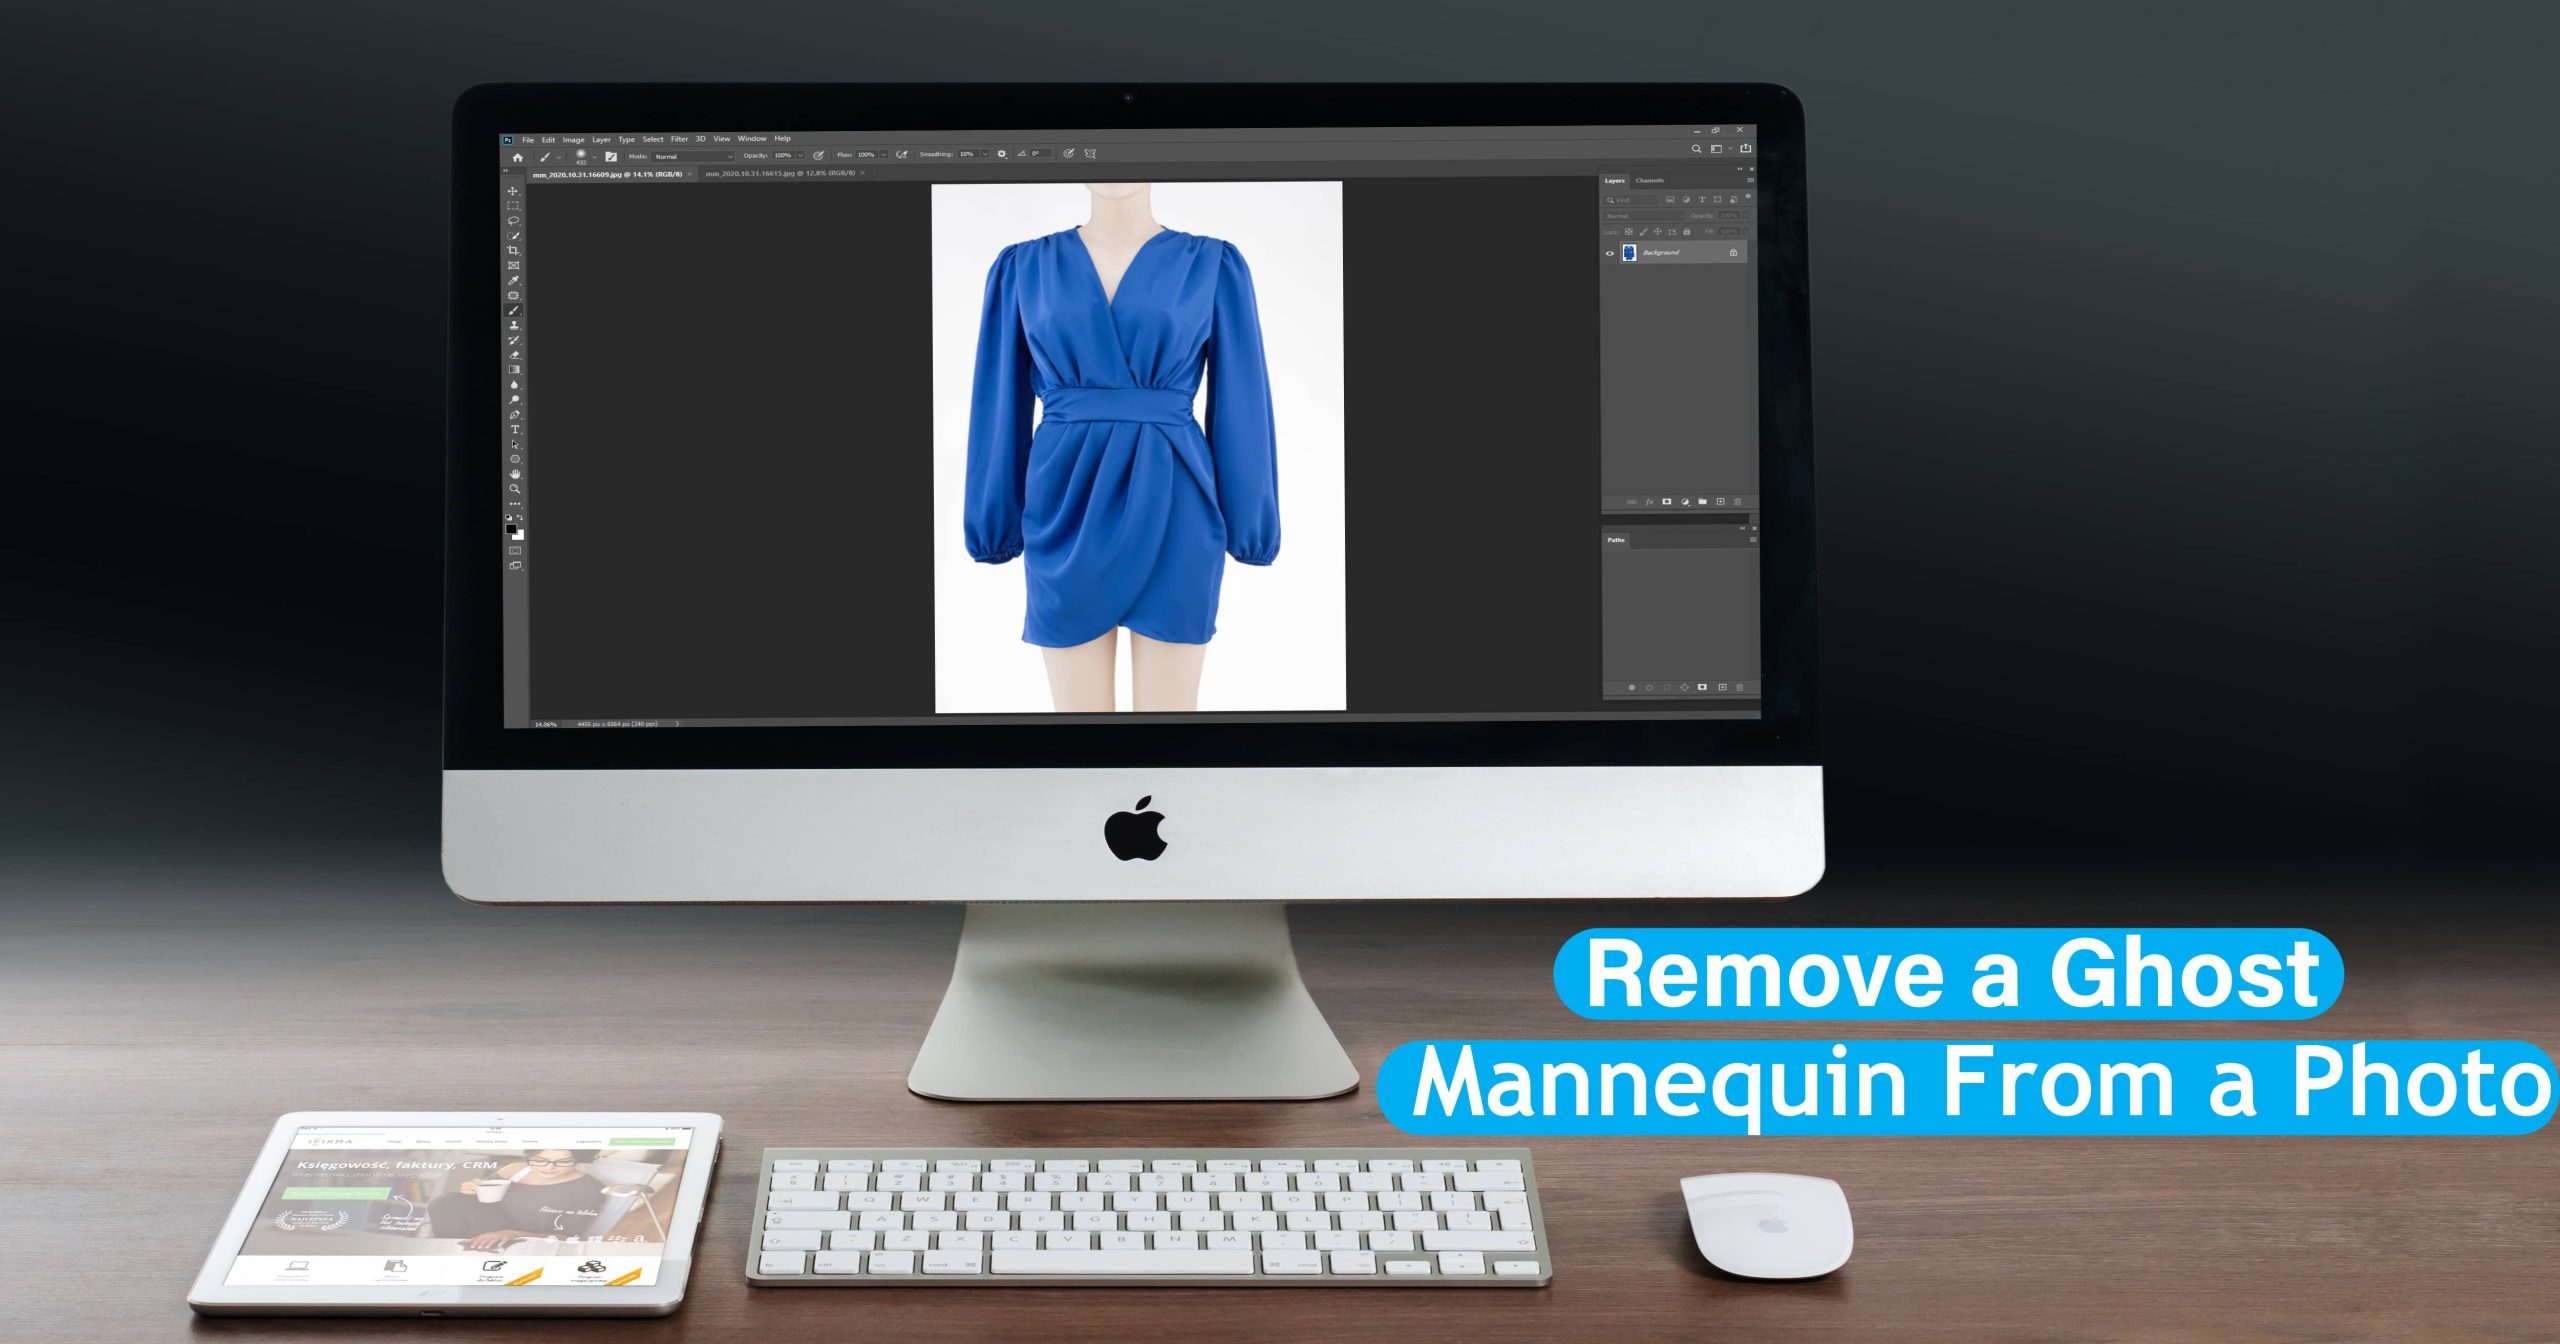 Remove a Ghost Mannequin From a Photo